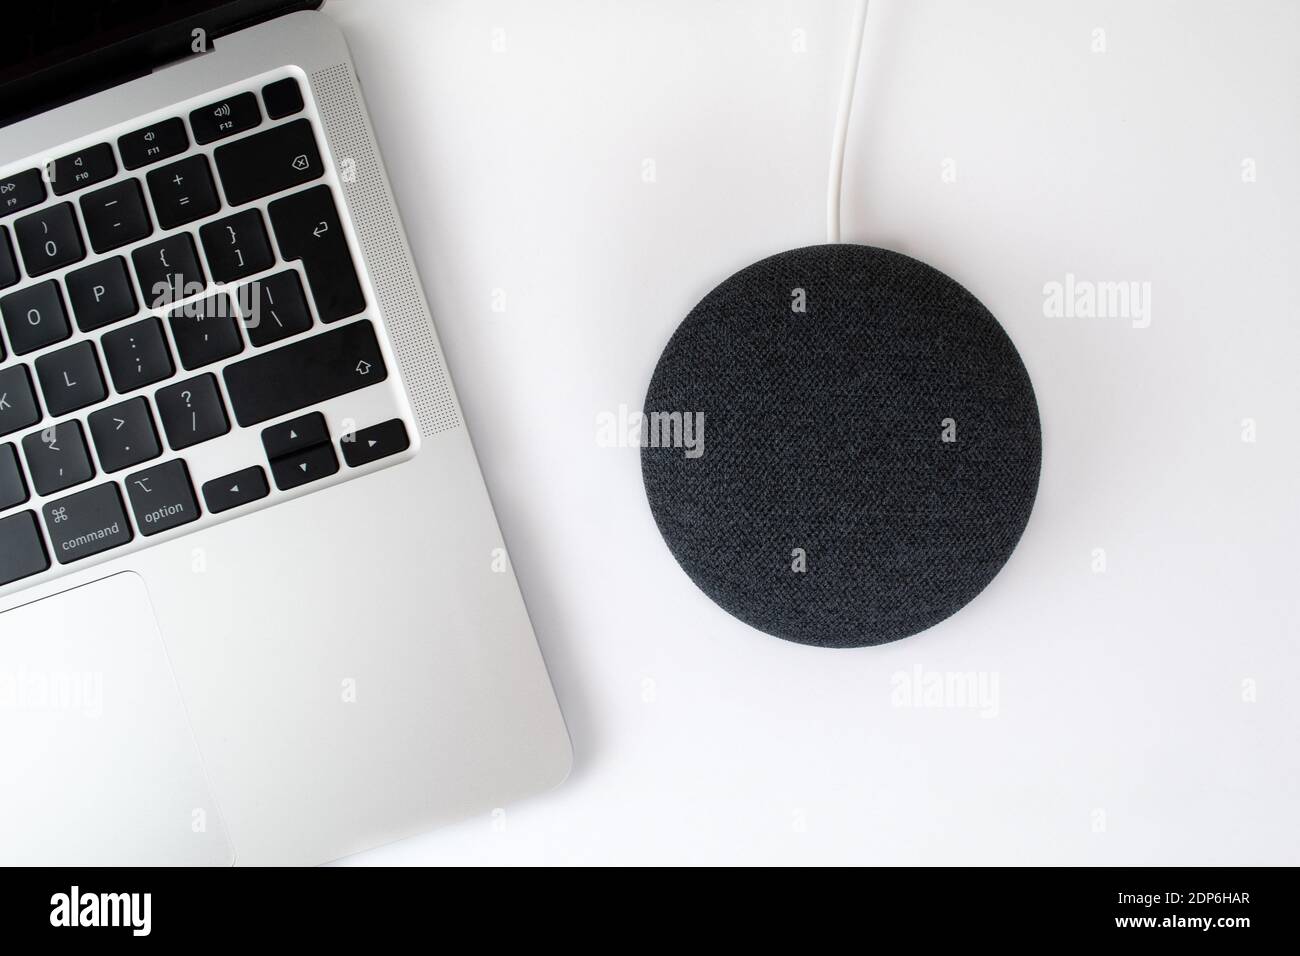 London, United Kingdom - 19 December 2020: Charcoal Google Nest Home Mini smart speaker with built in Google Assistant next to a laptop computer. Stock Photo